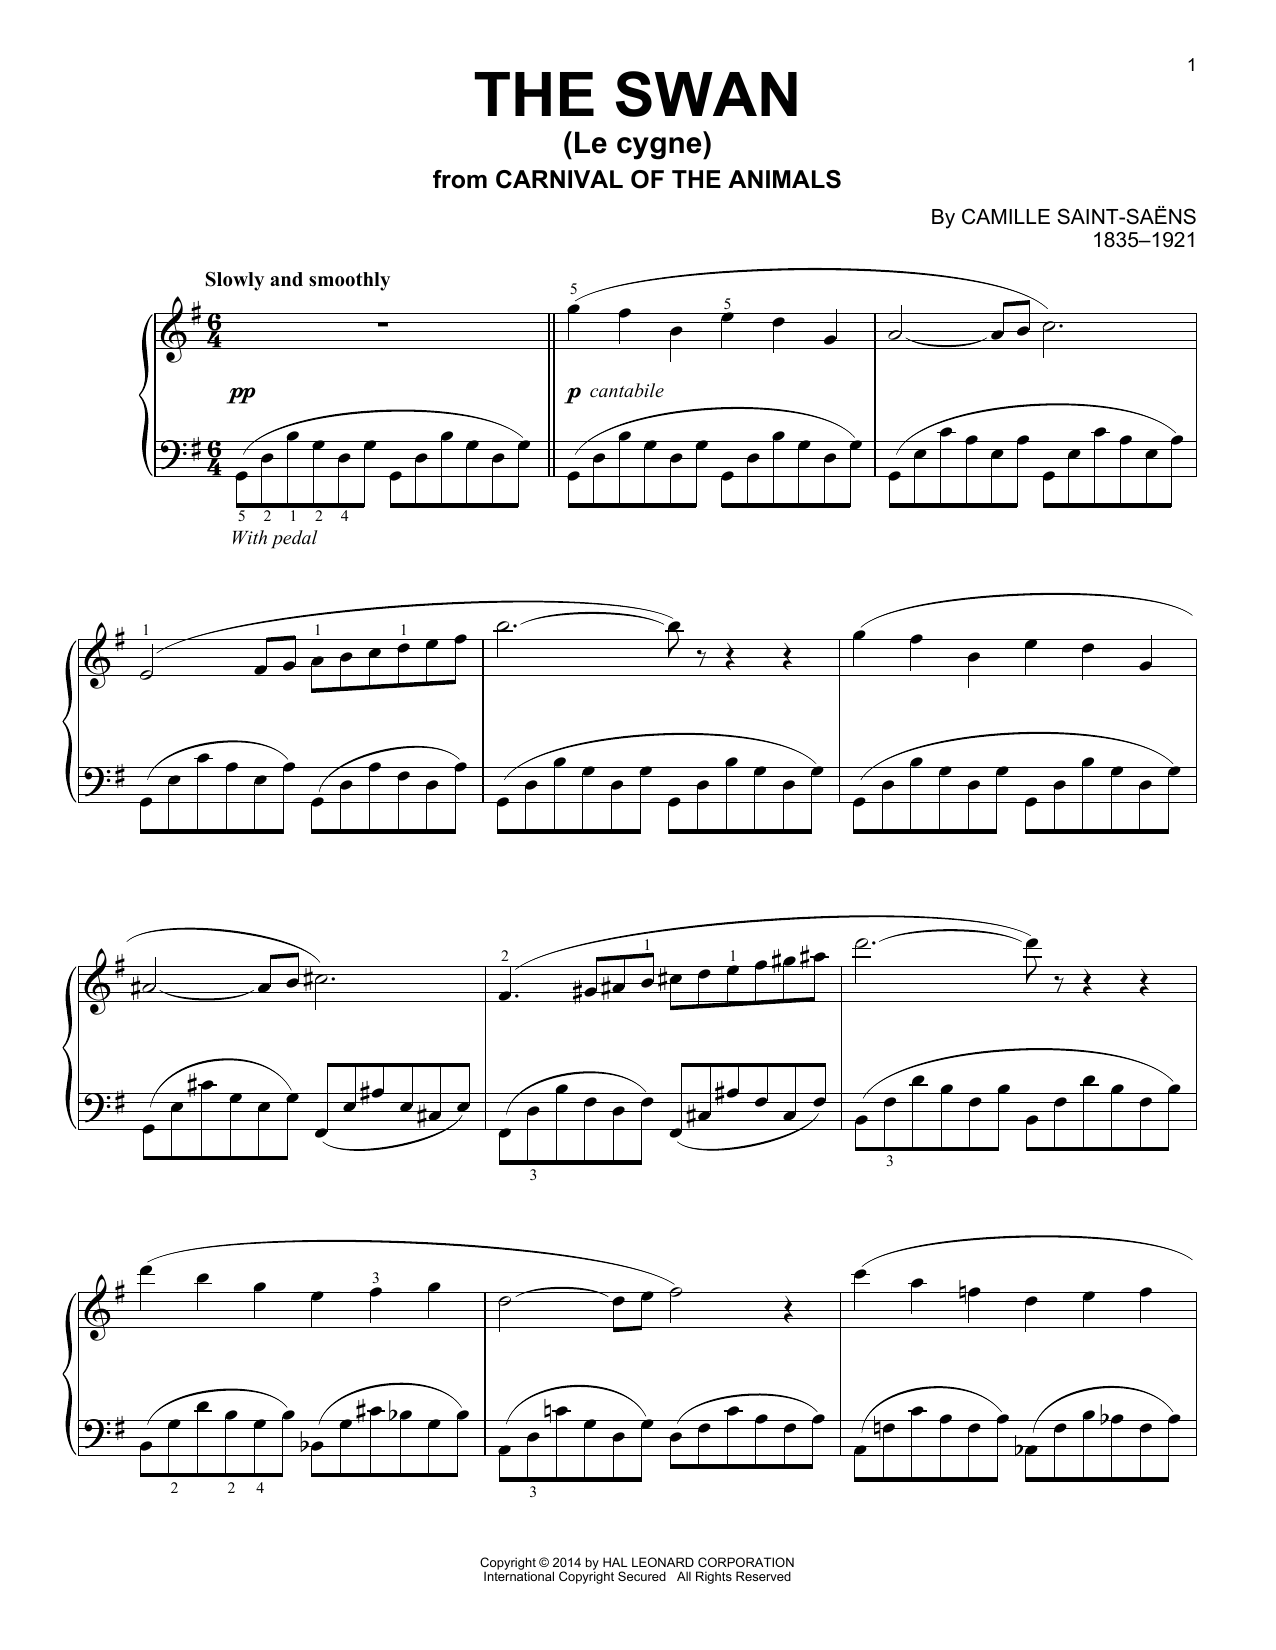 Download Camille Saint-Saens The Swan (Le Cygne) Sheet Music